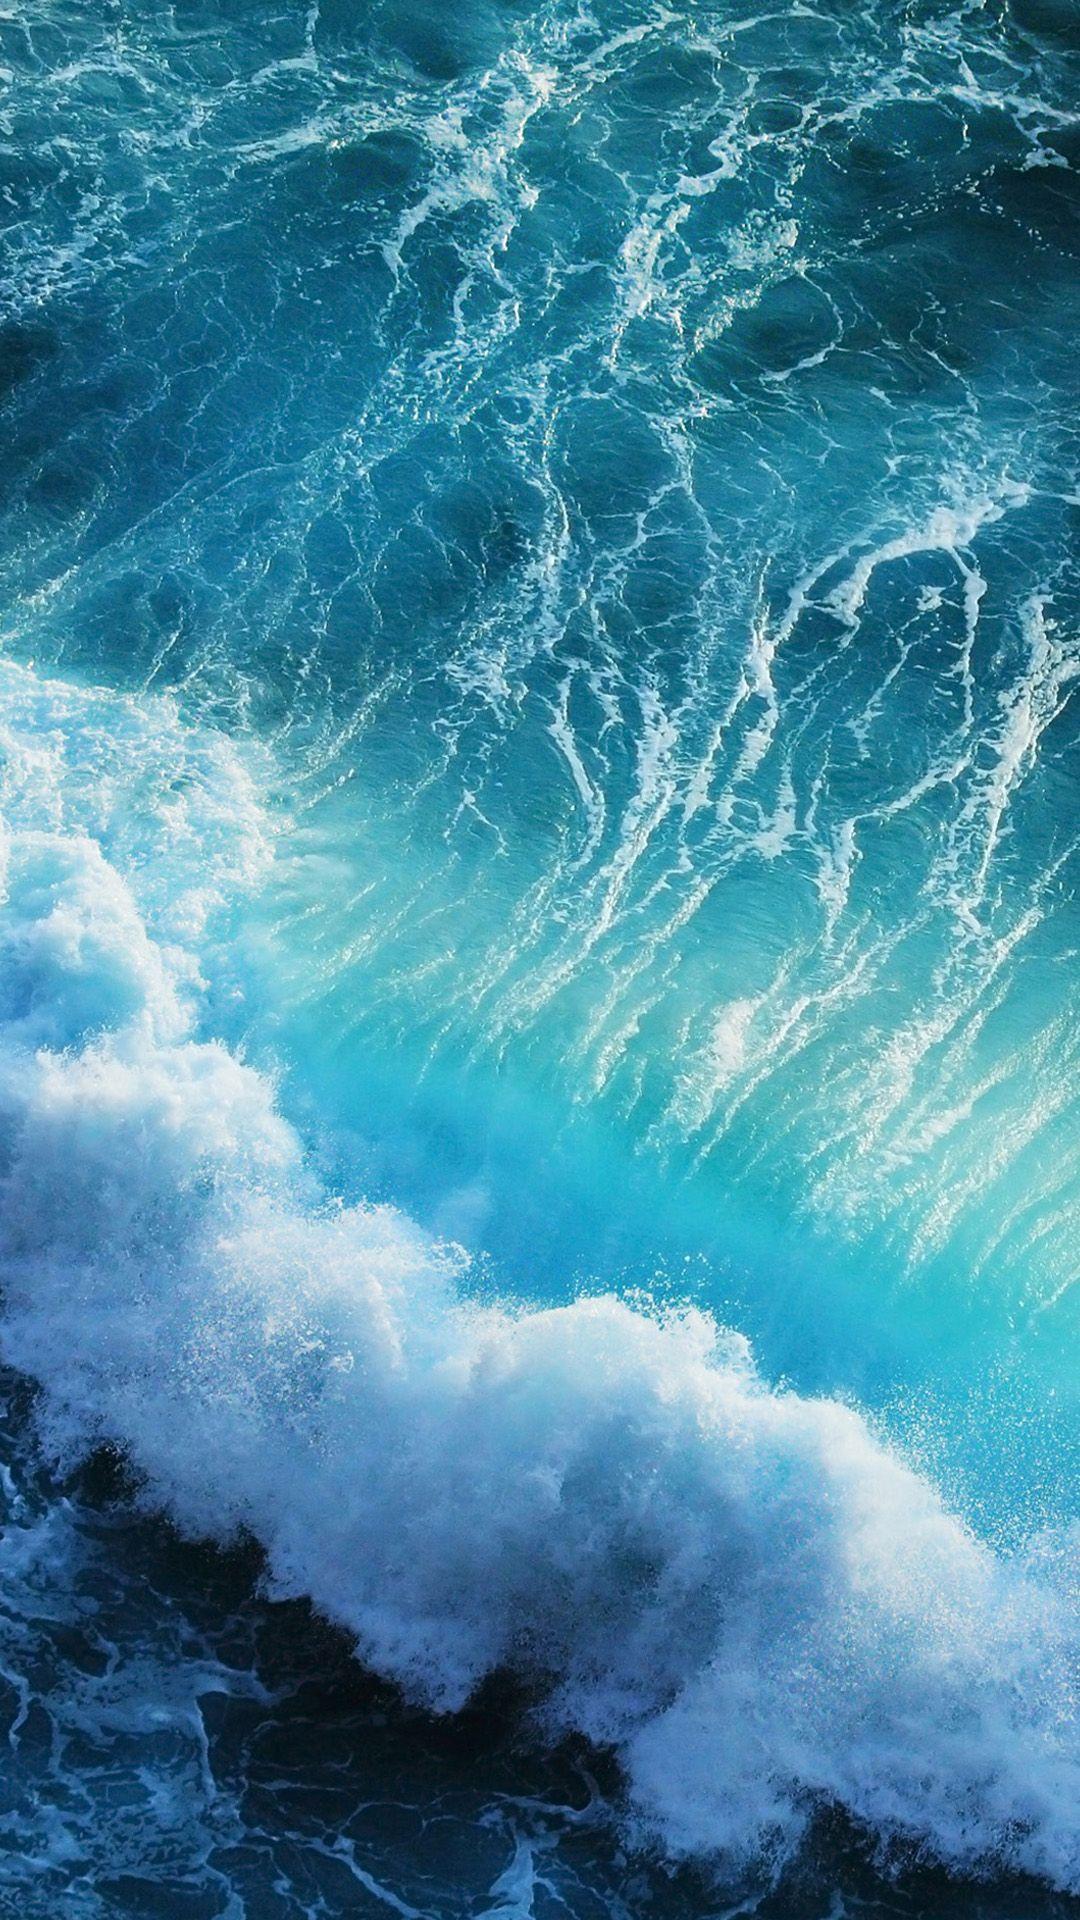 5 Cool Water Themed iPhone Wallpapers